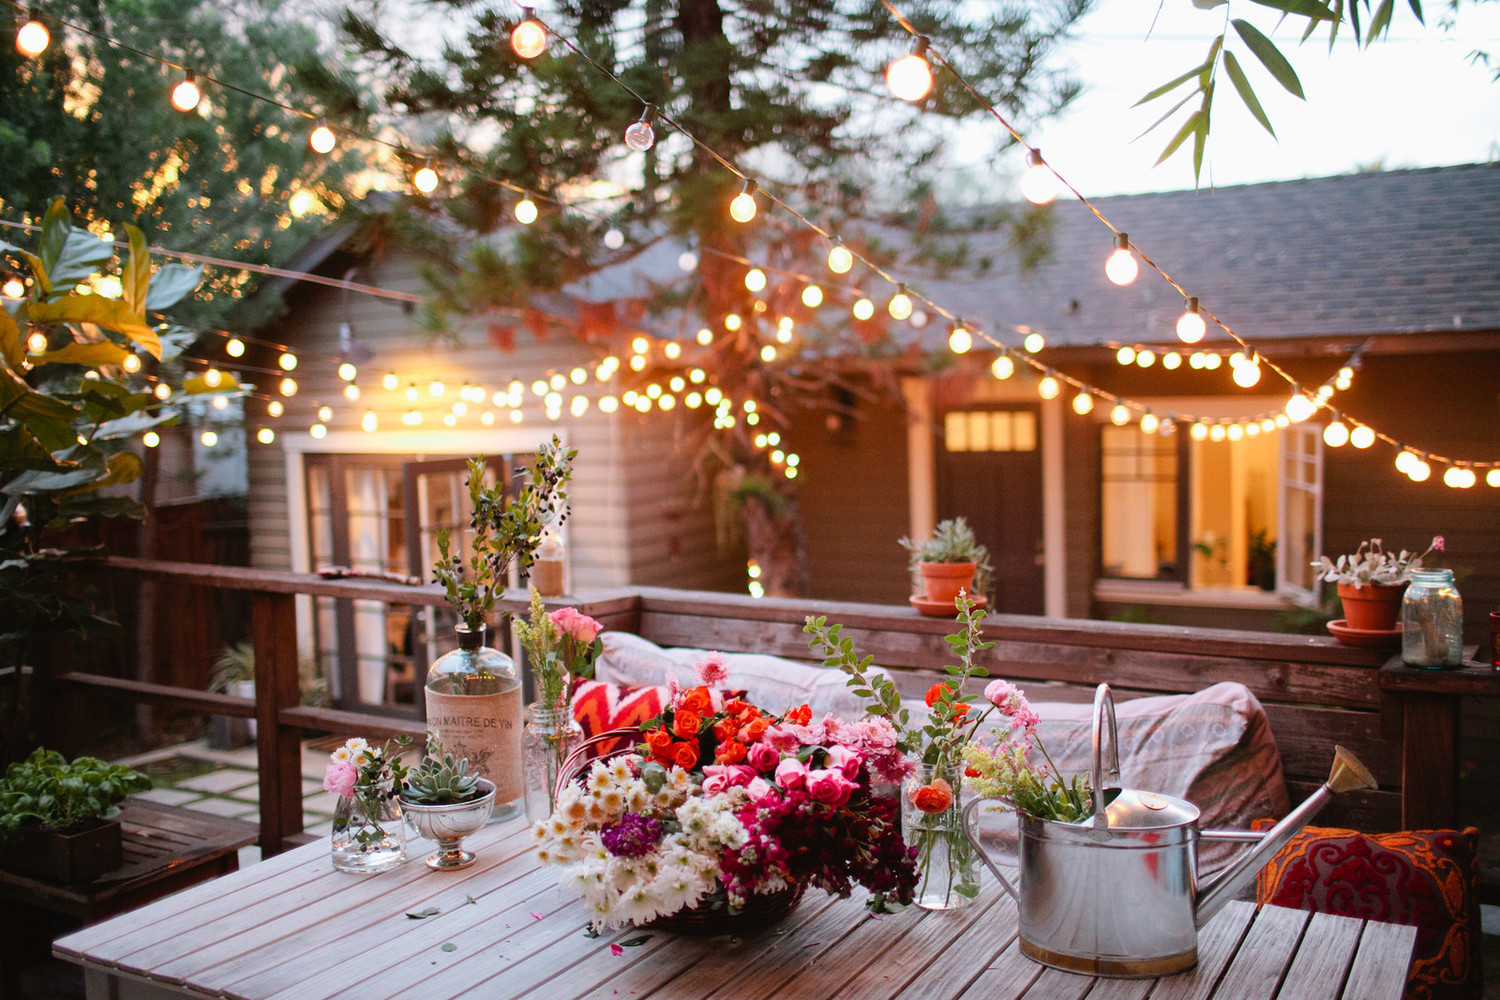 Backyard Lighting Ideas For A Party
 A New Pergola on the Deck from Thrifty Decor Chick